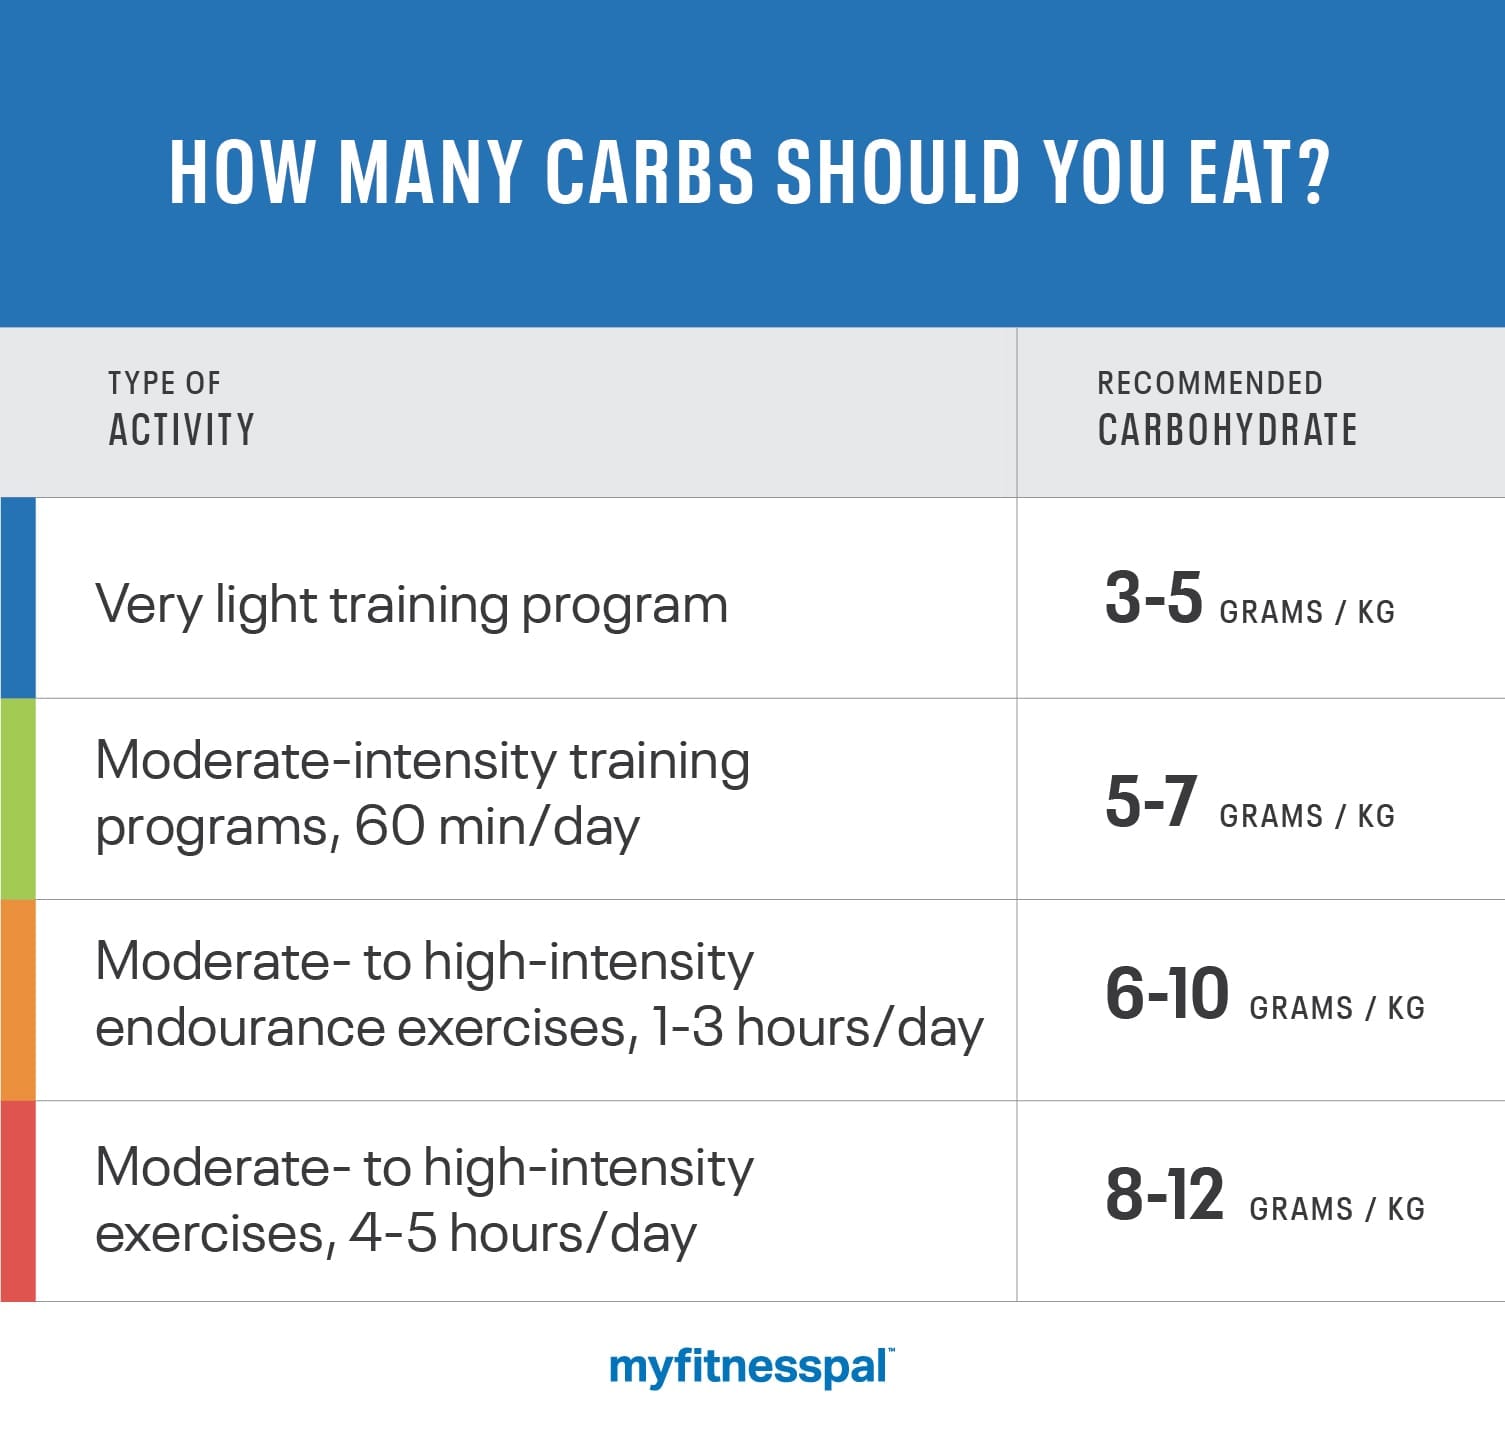 How Many Carbs Should You Eat in a Day